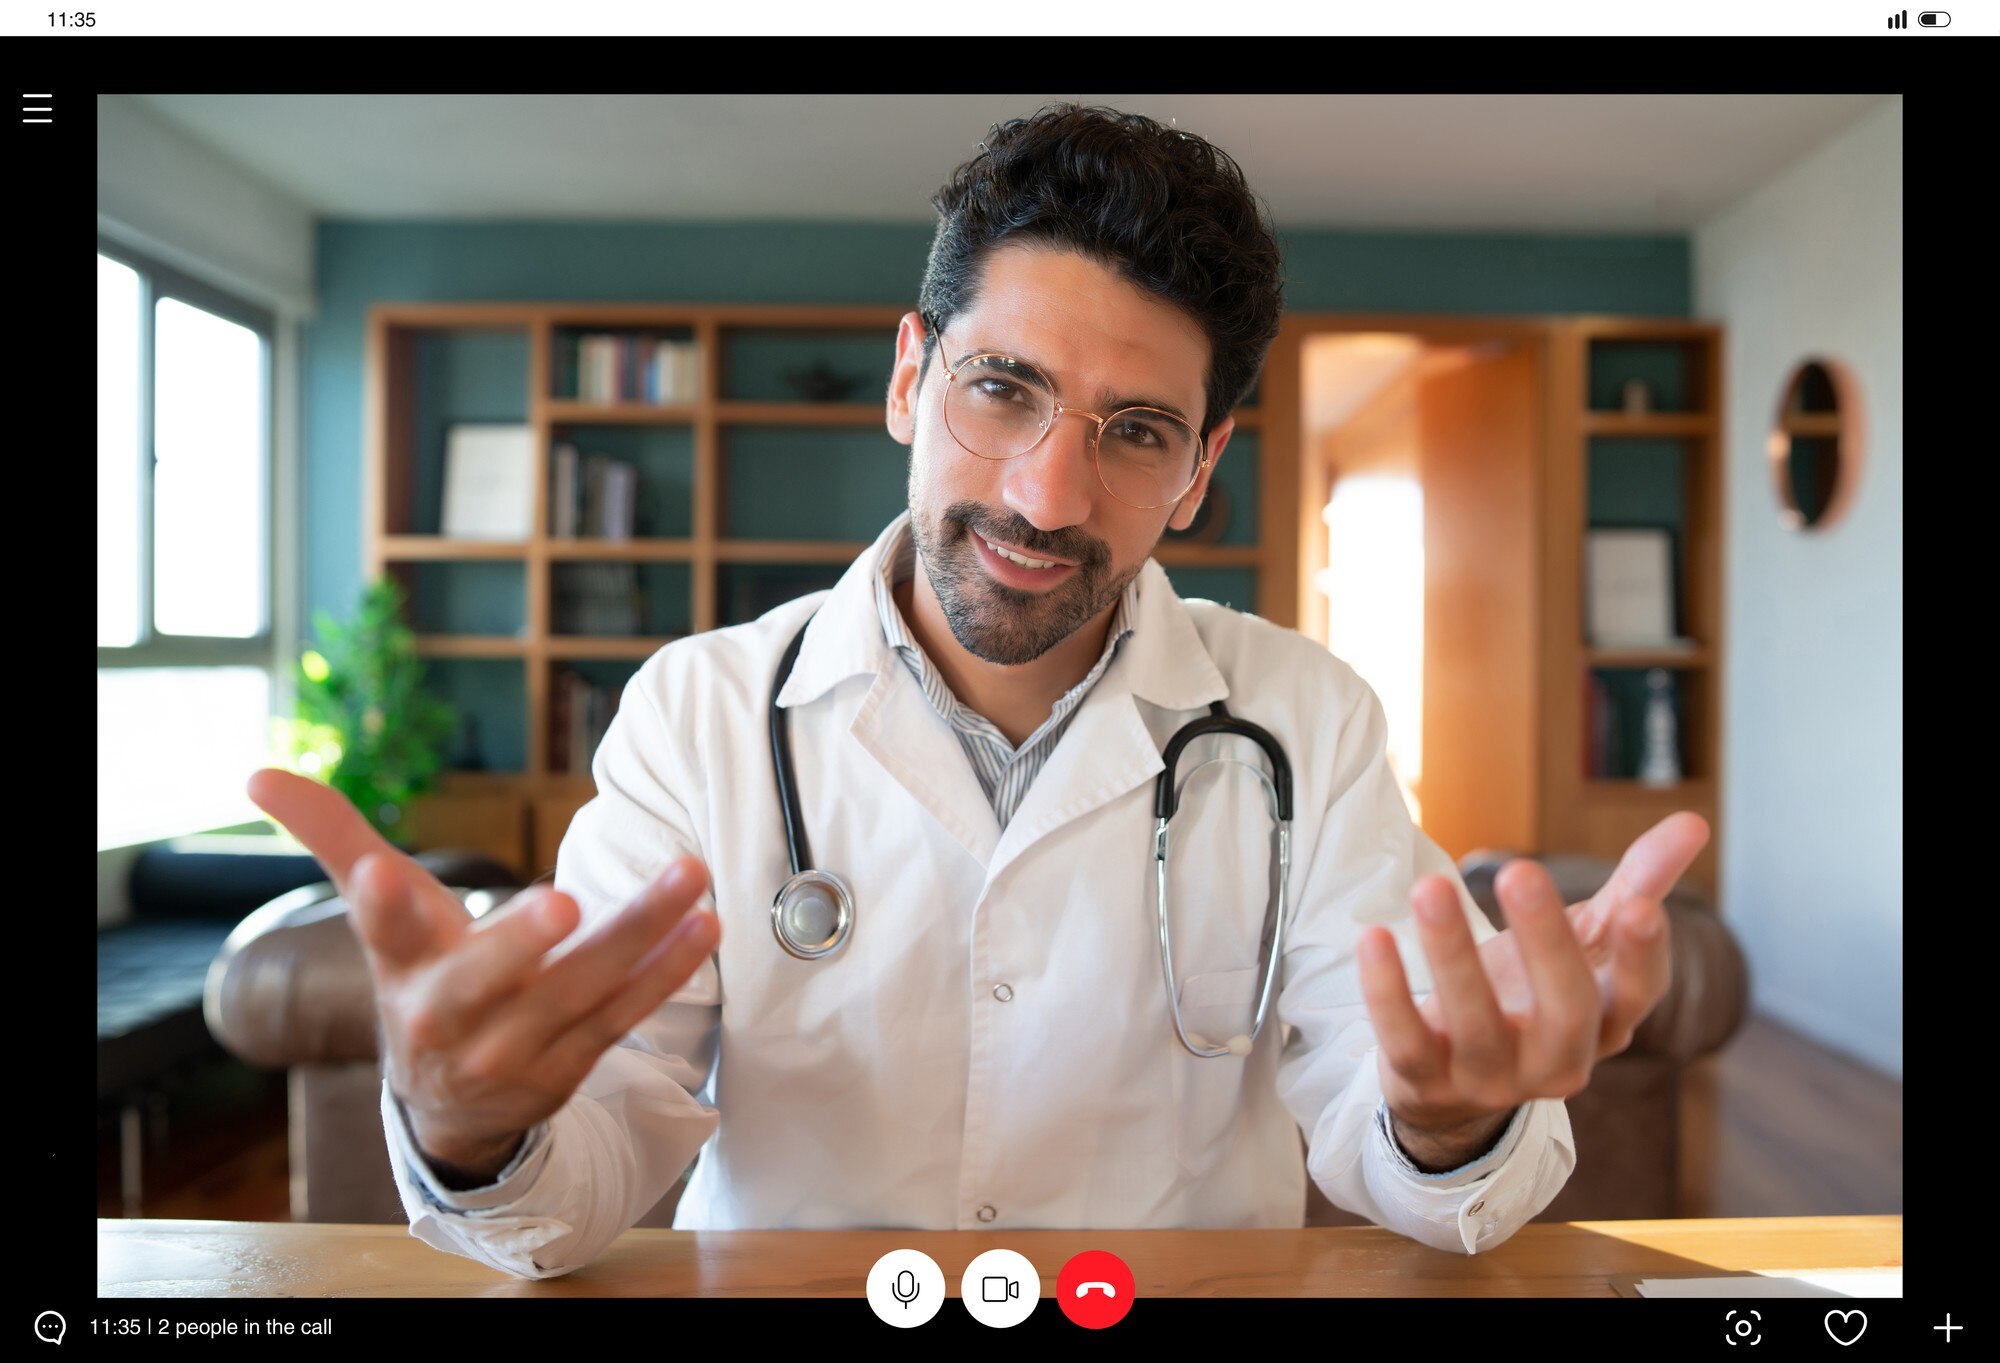 portrait-doctor-video-call-virtual-appointment-with-patient